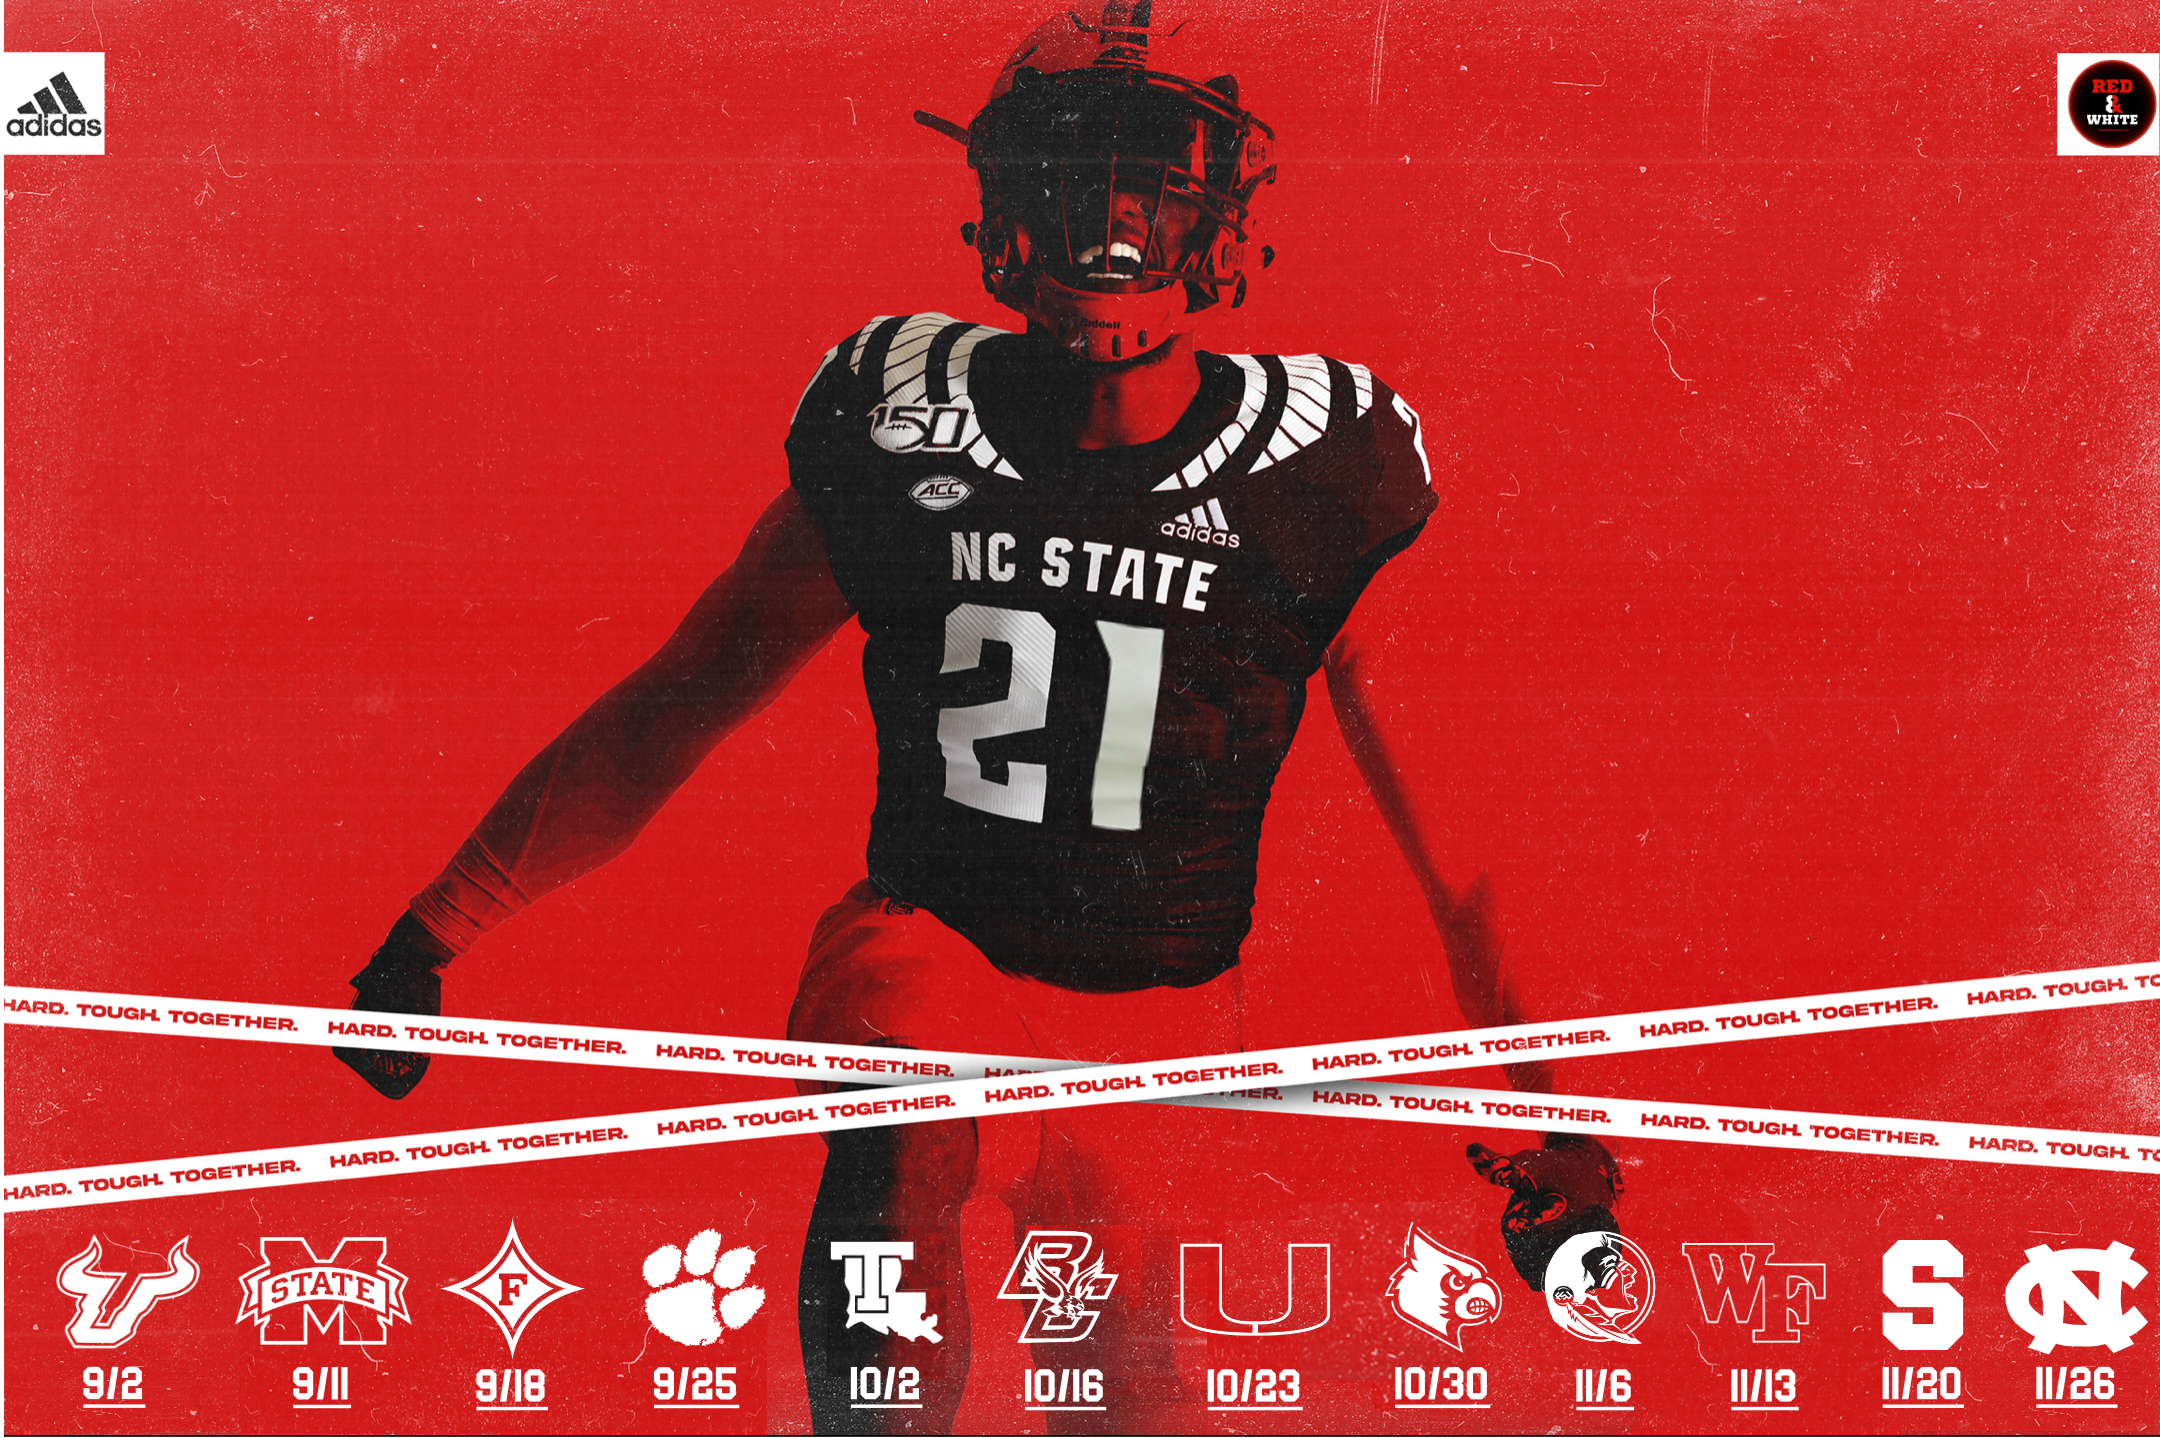 2160x1438 2021 NC State Backgrounds \u0026 Schedule Images